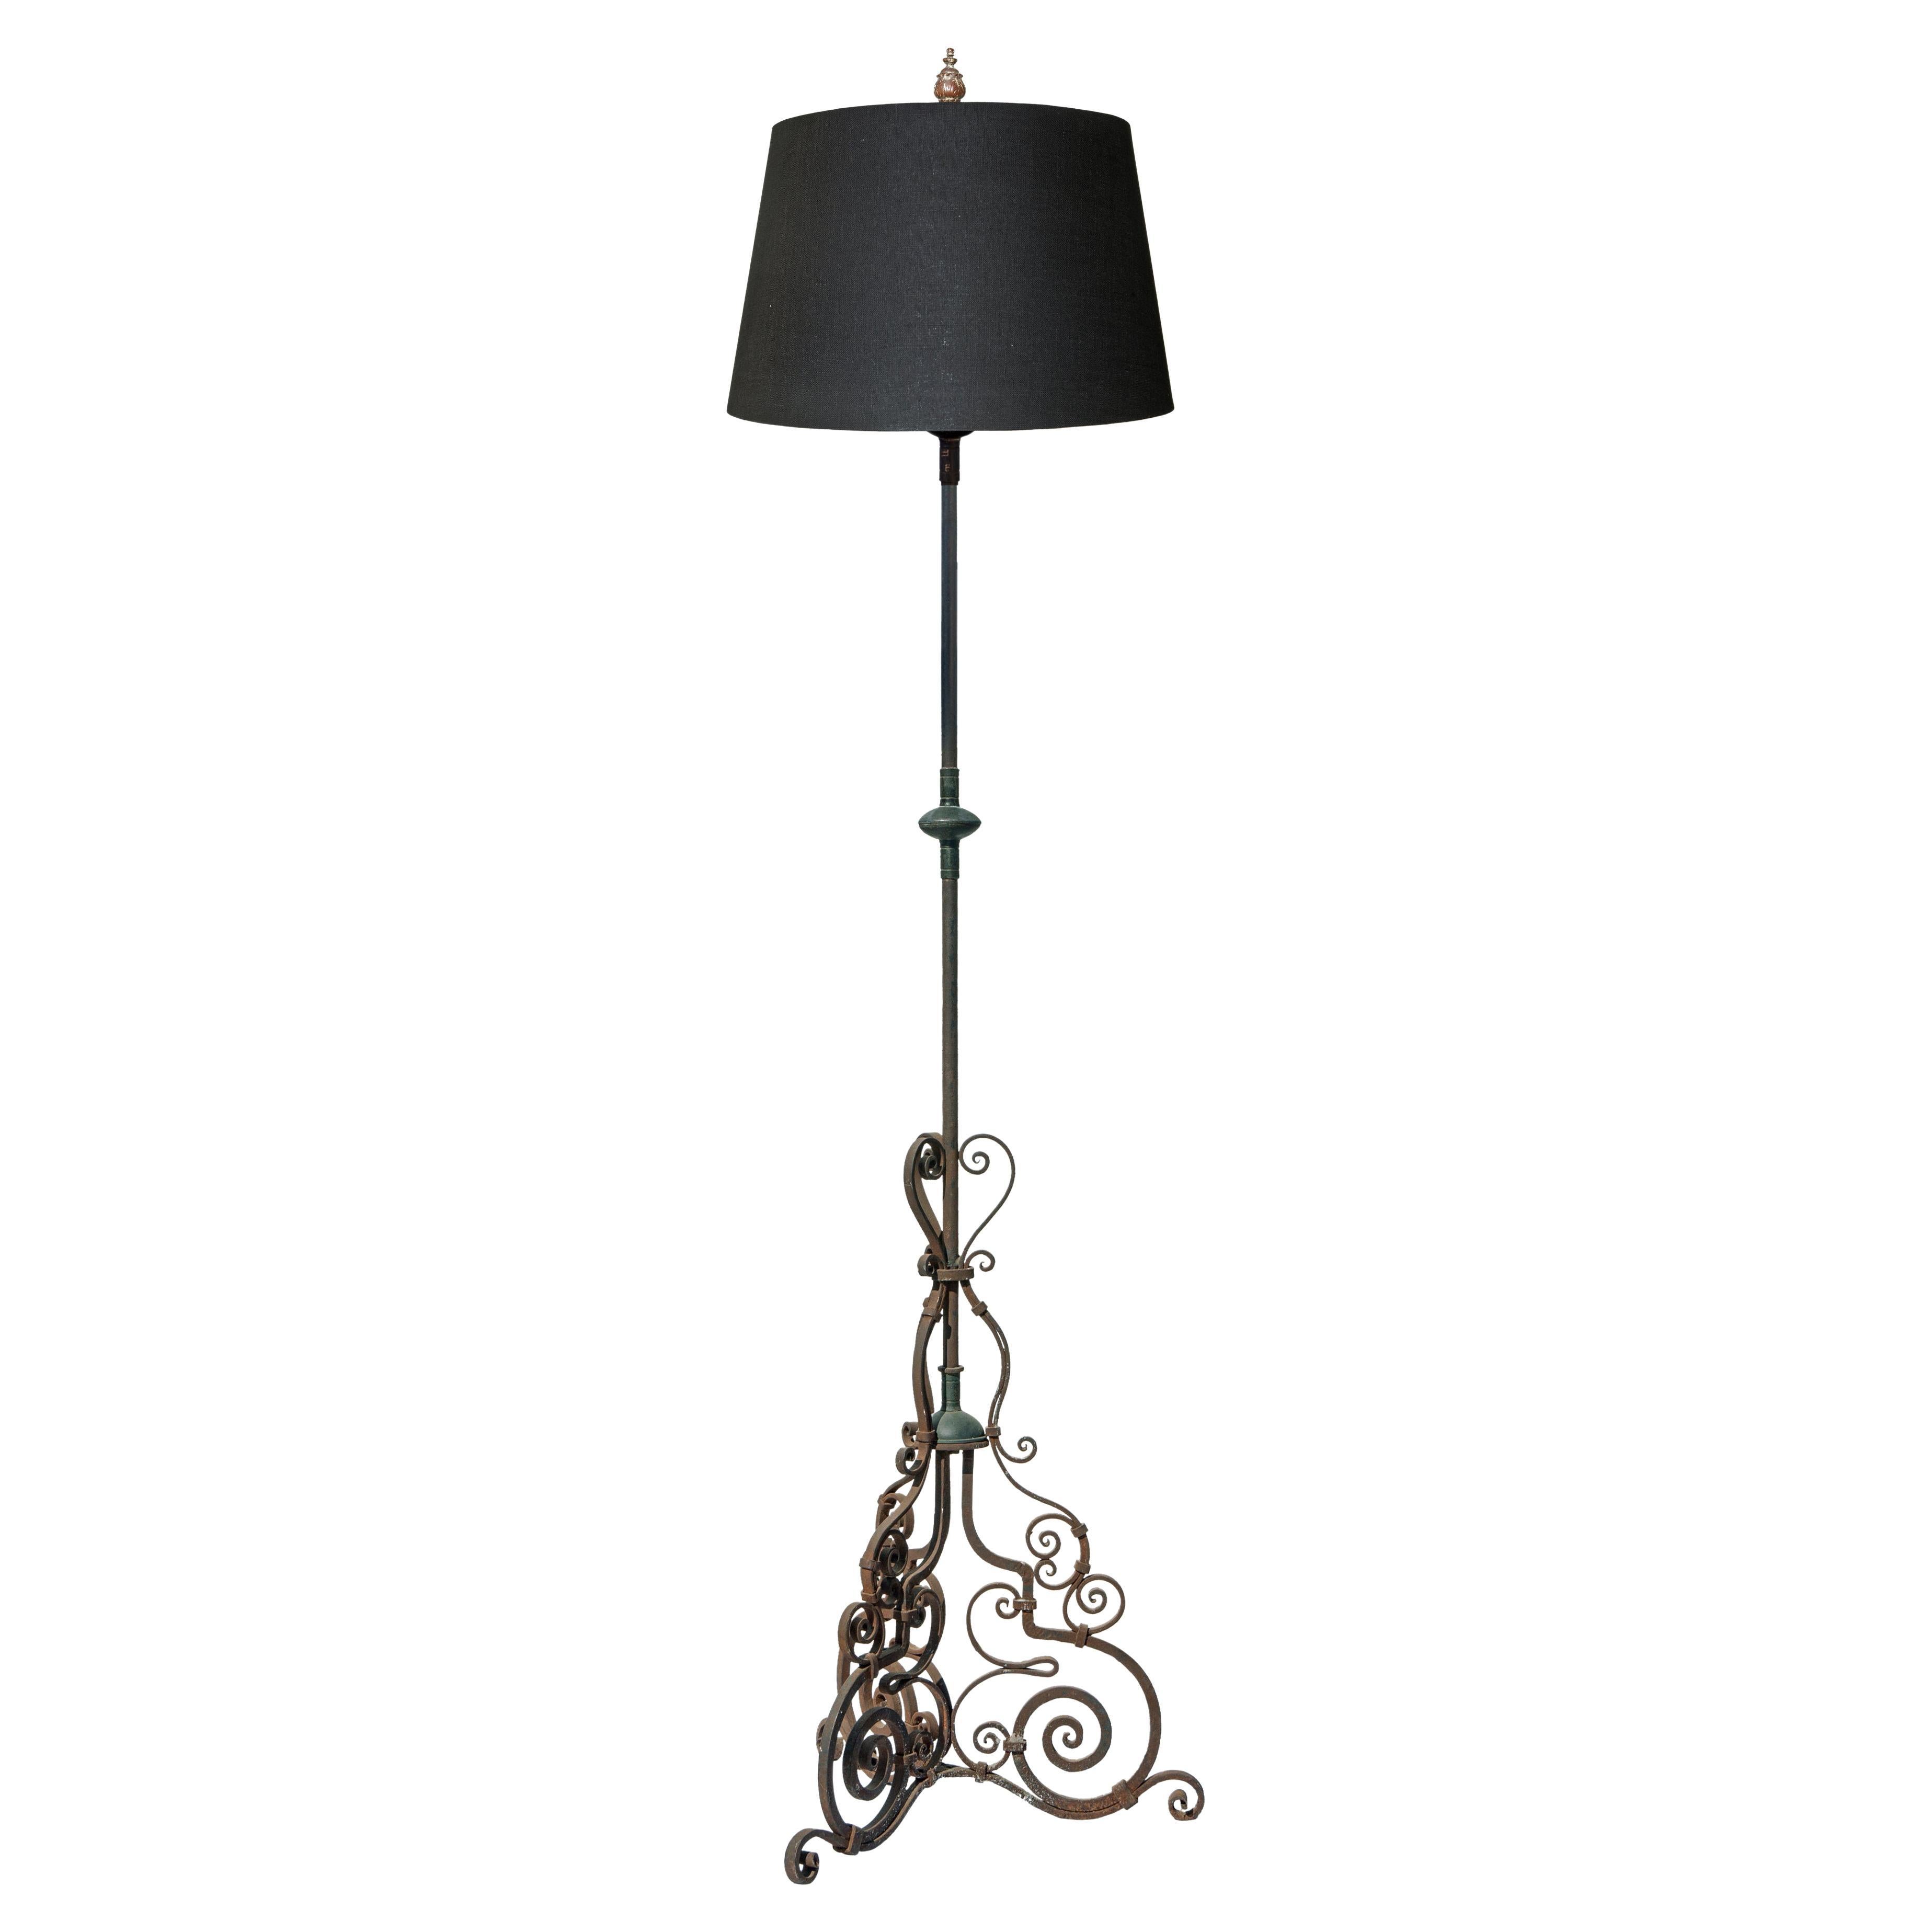 Original Santa Barbara Mission hand wrought iron floor lamp converted from floor candlestick. This rare piece is inspired by a natural rustic aesthetic. Newly wired, with pull chain, new cord & plug. Standard bulb recommended.
Ivory hardback shades